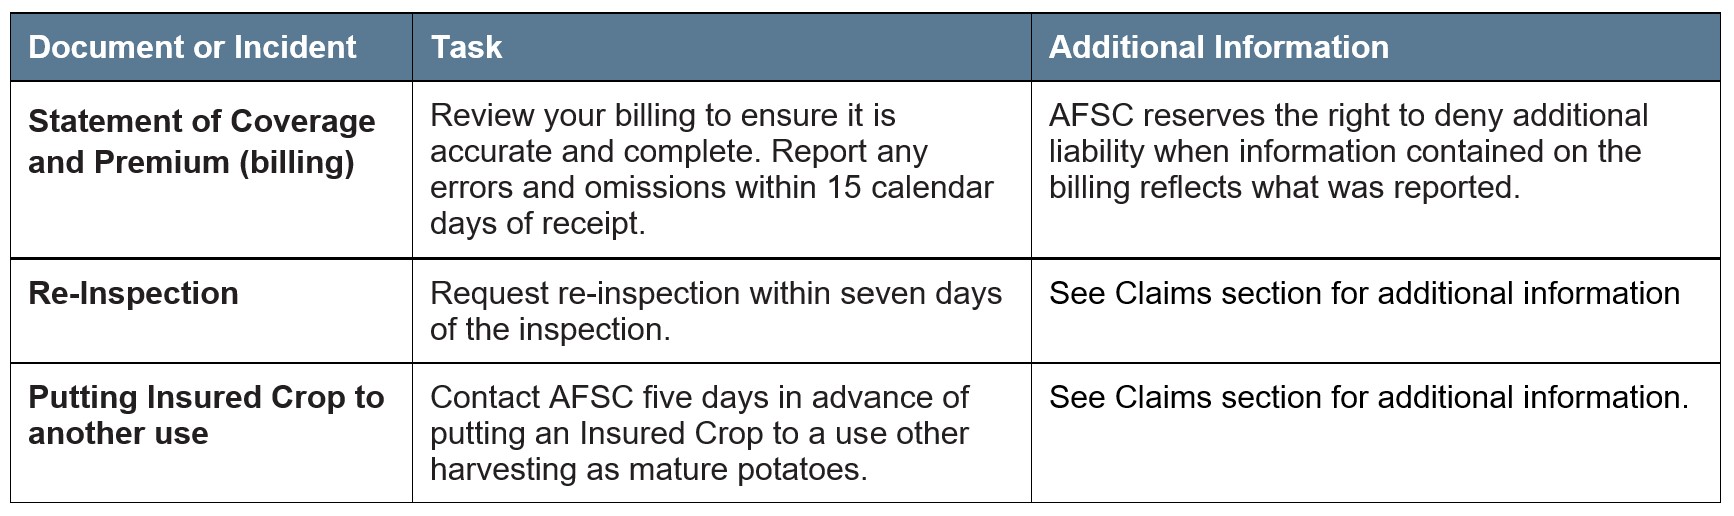 Potato Article 4 Other Deadlines. Call AFSC for details